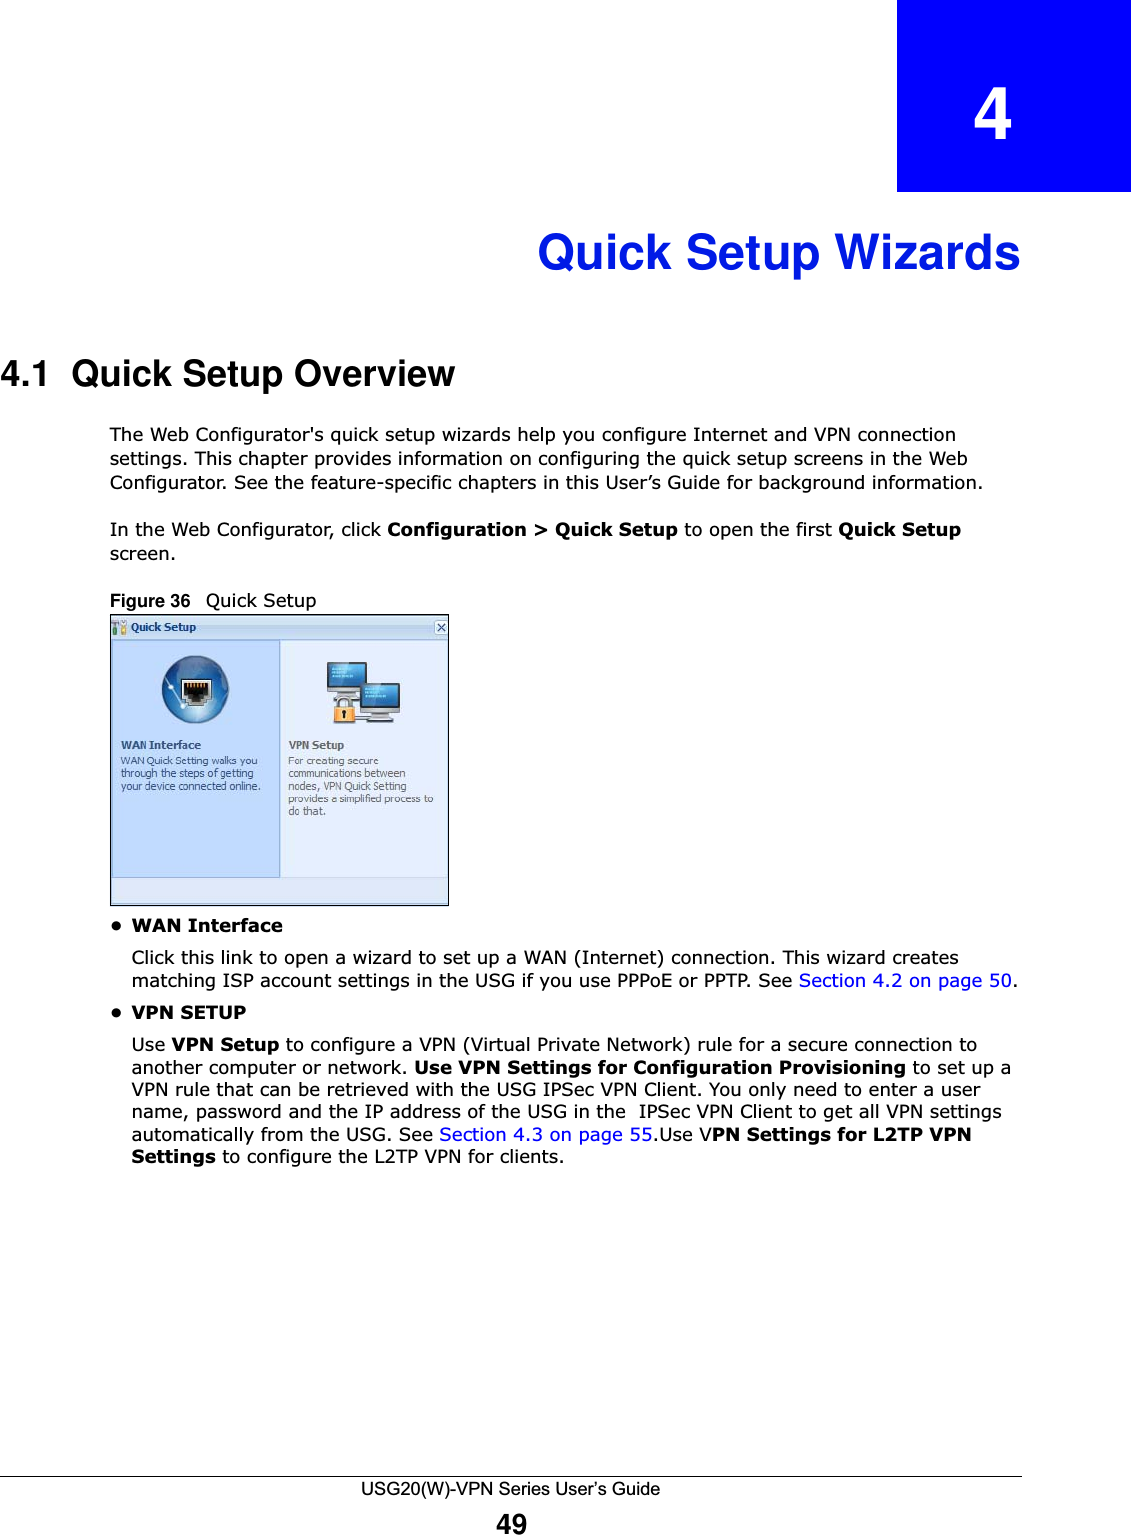 USG20(W)-VPN Series User’s Guide49CHAPTER   4Quick Setup Wizards4.1  Quick Setup OverviewThe Web Configurator&apos;s quick setup wizards help you configure Internet and VPN connection settings. This chapter provides information on configuring the quick setup screens in the Web Configurator. See the feature-specific chapters in this User’s Guide for background information.In the Web Configurator, click Configuration &gt; Quick Setup to open the first Quick Setup screen. Figure 36   Quick Setup   •WAN InterfaceClick this link to open a wizard to set up a WAN (Internet) connection. This wizard creates matching ISP account settings in the USG if you use PPPoE or PPTP. See Section 4.2 on page 50.•VPN SETUPUse VPN Setup to configure a VPN (Virtual Private Network) rule for a secure connection to another computer or network. Use VPN Settings for Configuration Provisioning to set up a VPN rule that can be retrieved with the USG IPSec VPN Client. You only need to enter a user name, password and the IP address of the USG in the  IPSec VPN Client to get all VPN settings automatically from the USG. See Section 4.3 on page 55.Use VPN Settings for L2TP VPN Settings to configure the L2TP VPN for clients.